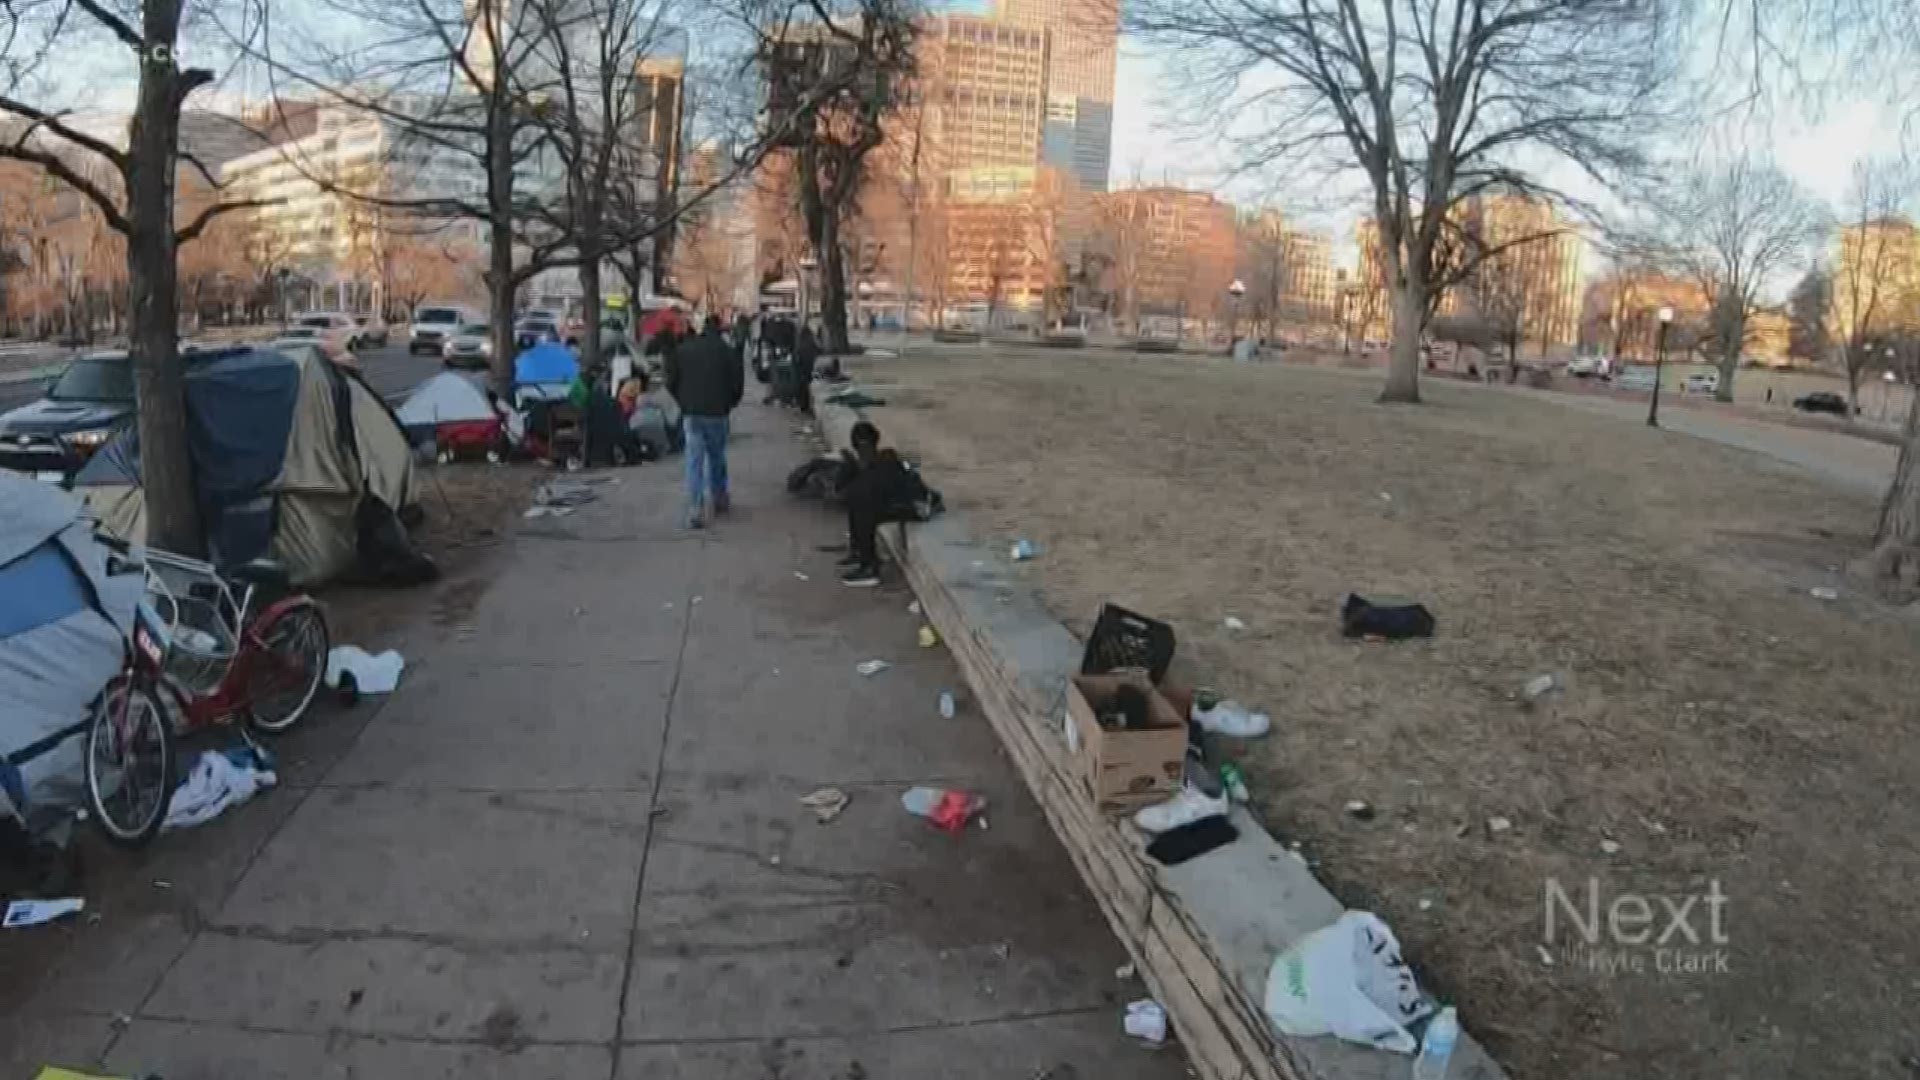 People are trying to count the number of Coloradans who are homeless as the mayor's administration takes action that could drive them away from public places.